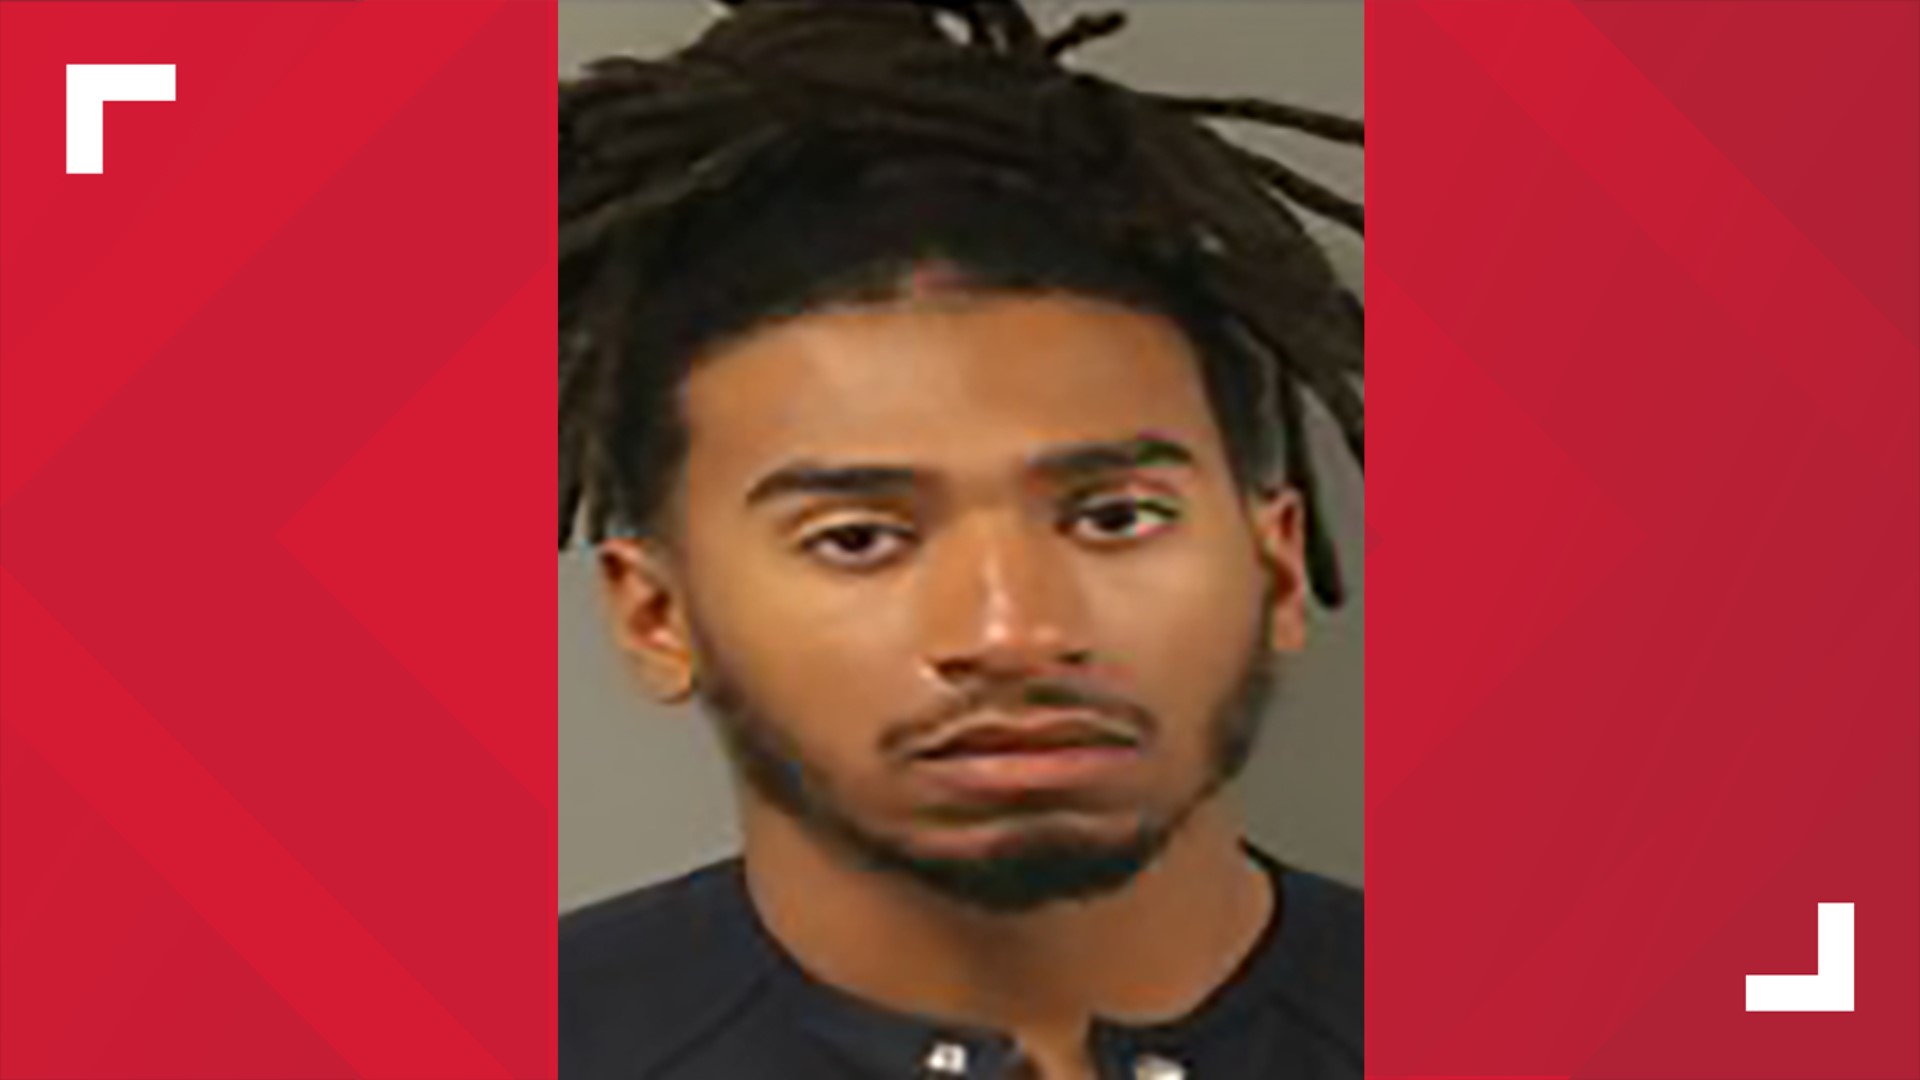 Officers with the Fort Dodge Police Department and U.S. Marshals tracked 27-year-old Adarius Keshawn Clayton to Des Moines around 12:30 p.m. Friday.